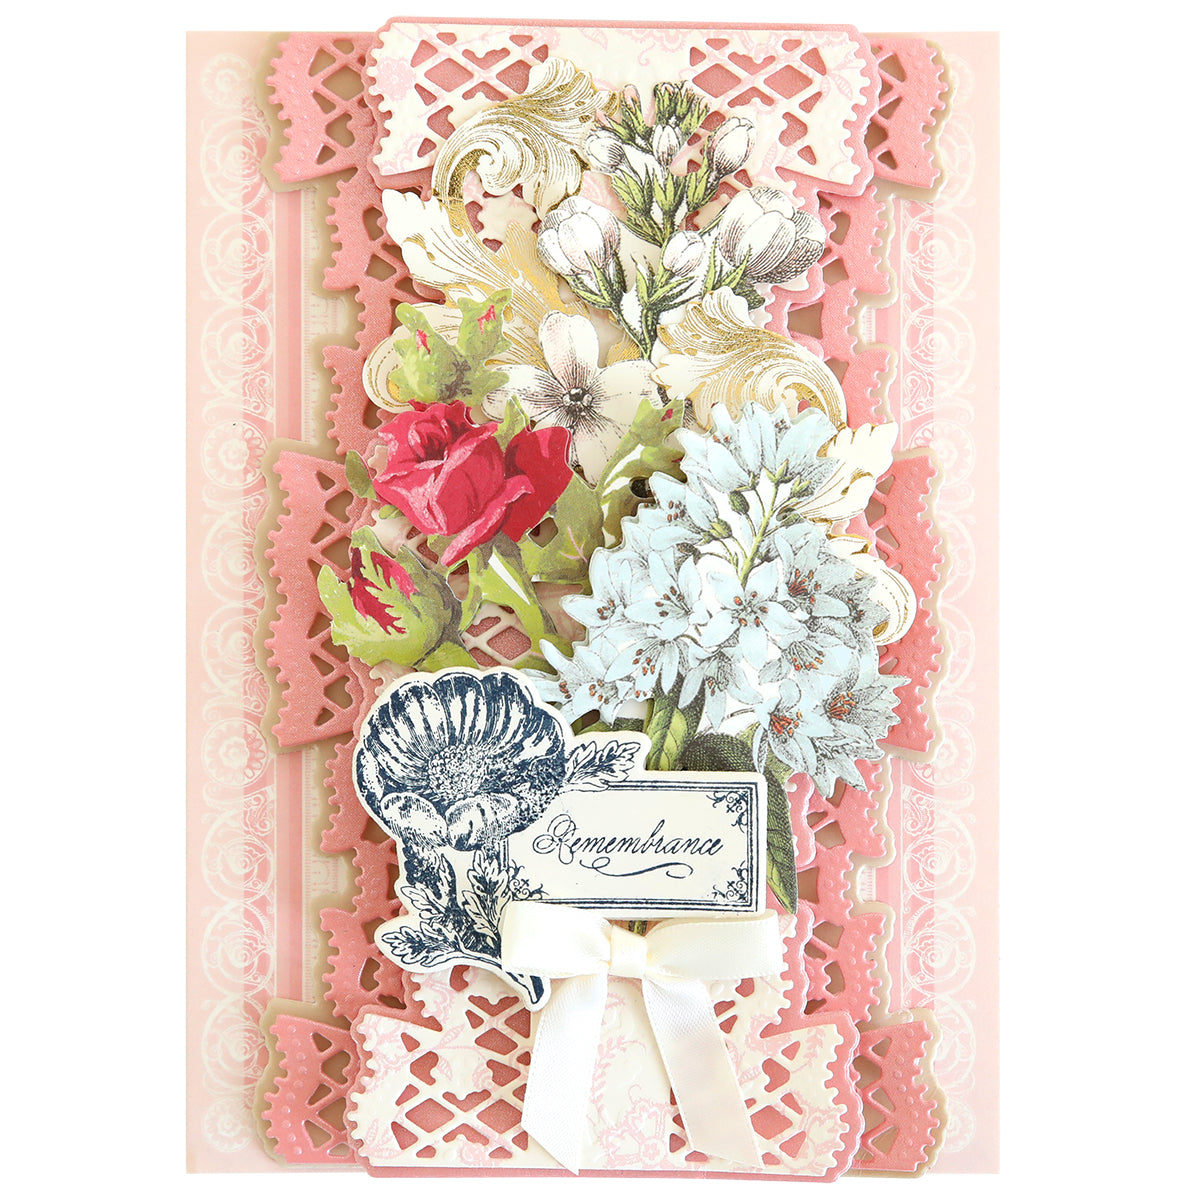 An ornate greeting card featuring a floral bouquet design with a "remembrance" tag, enhanced with Flower Language Stamps and Dies and a decorative ribbon.